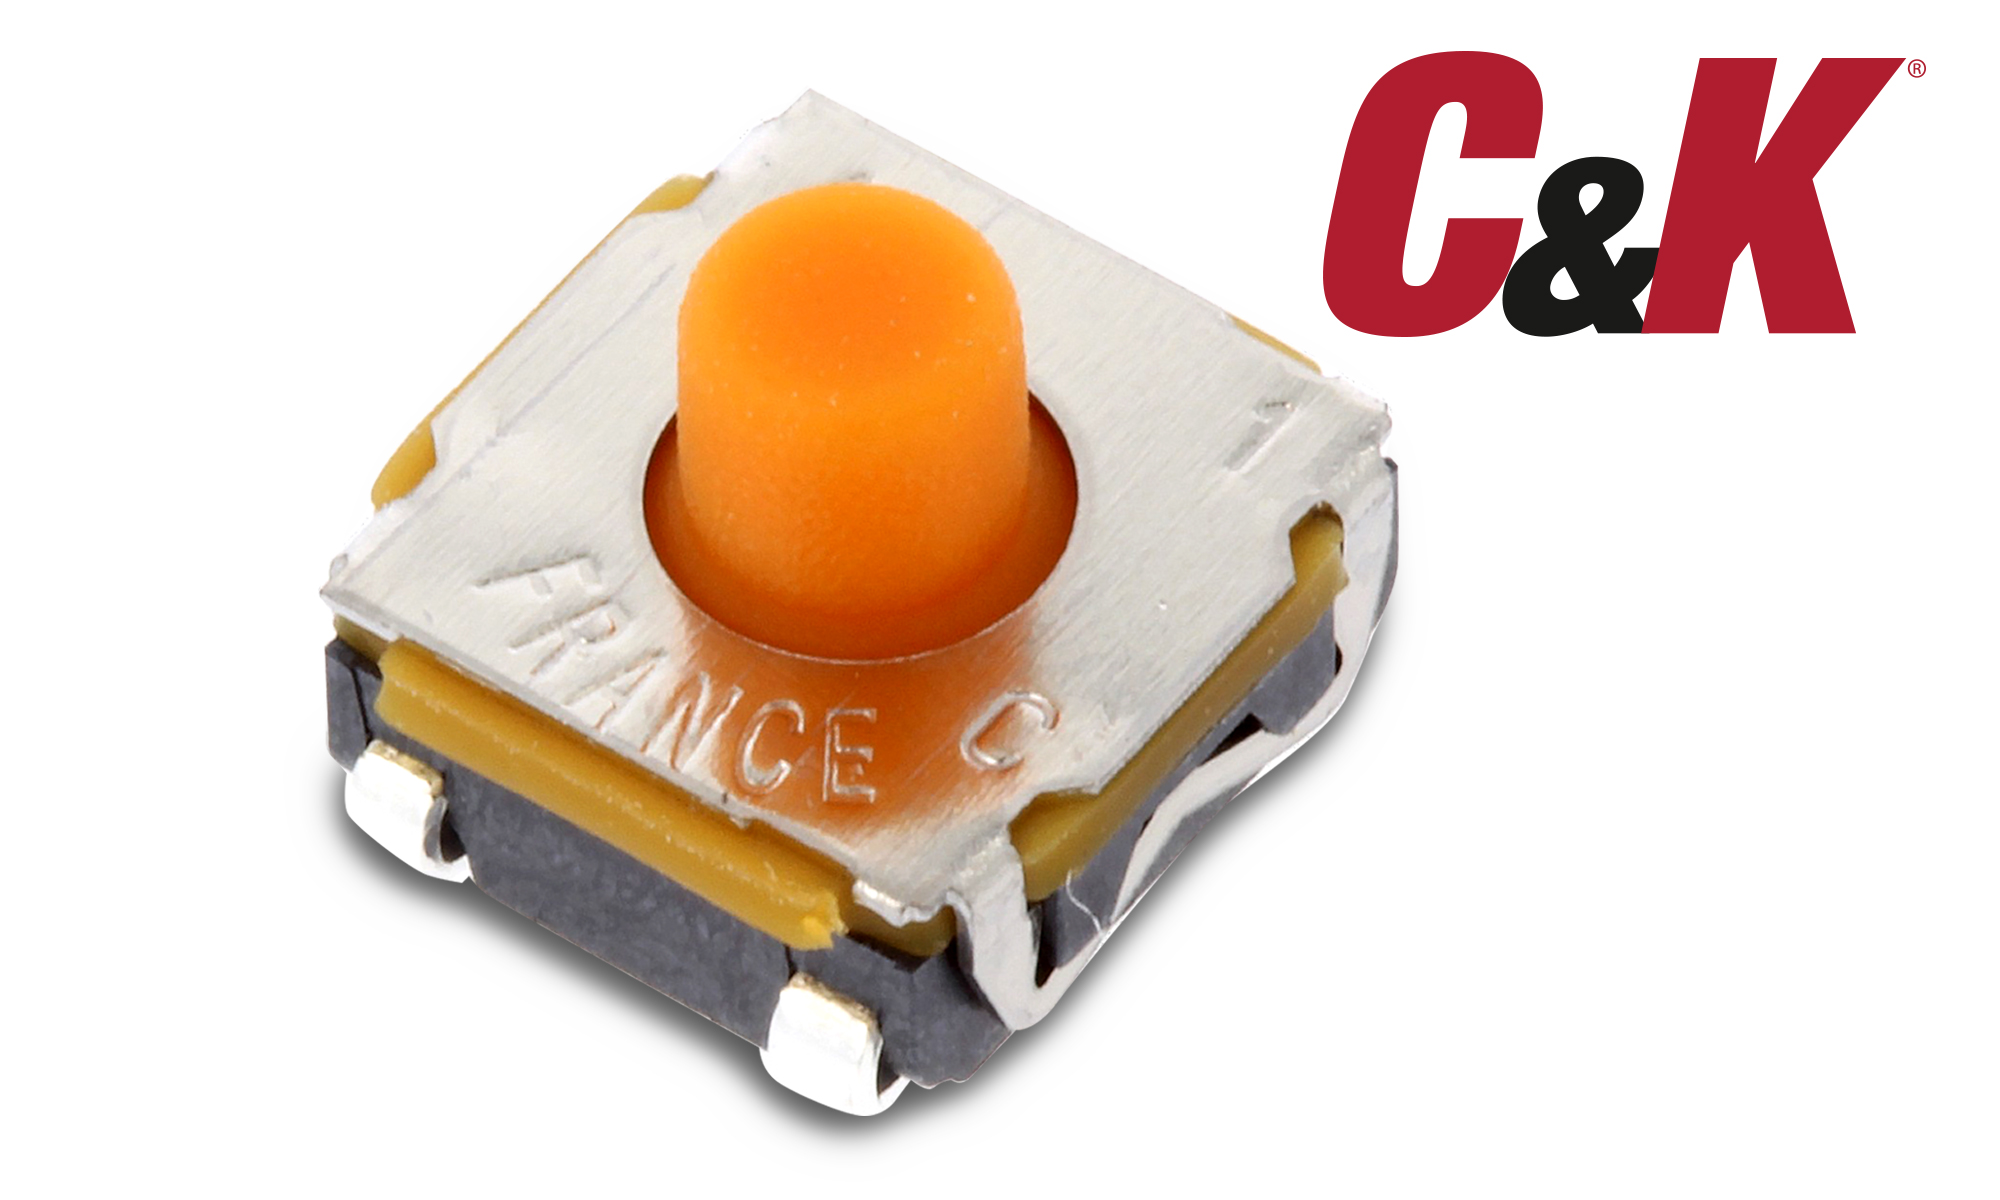 High quality KSC-DCT series switches by C&K